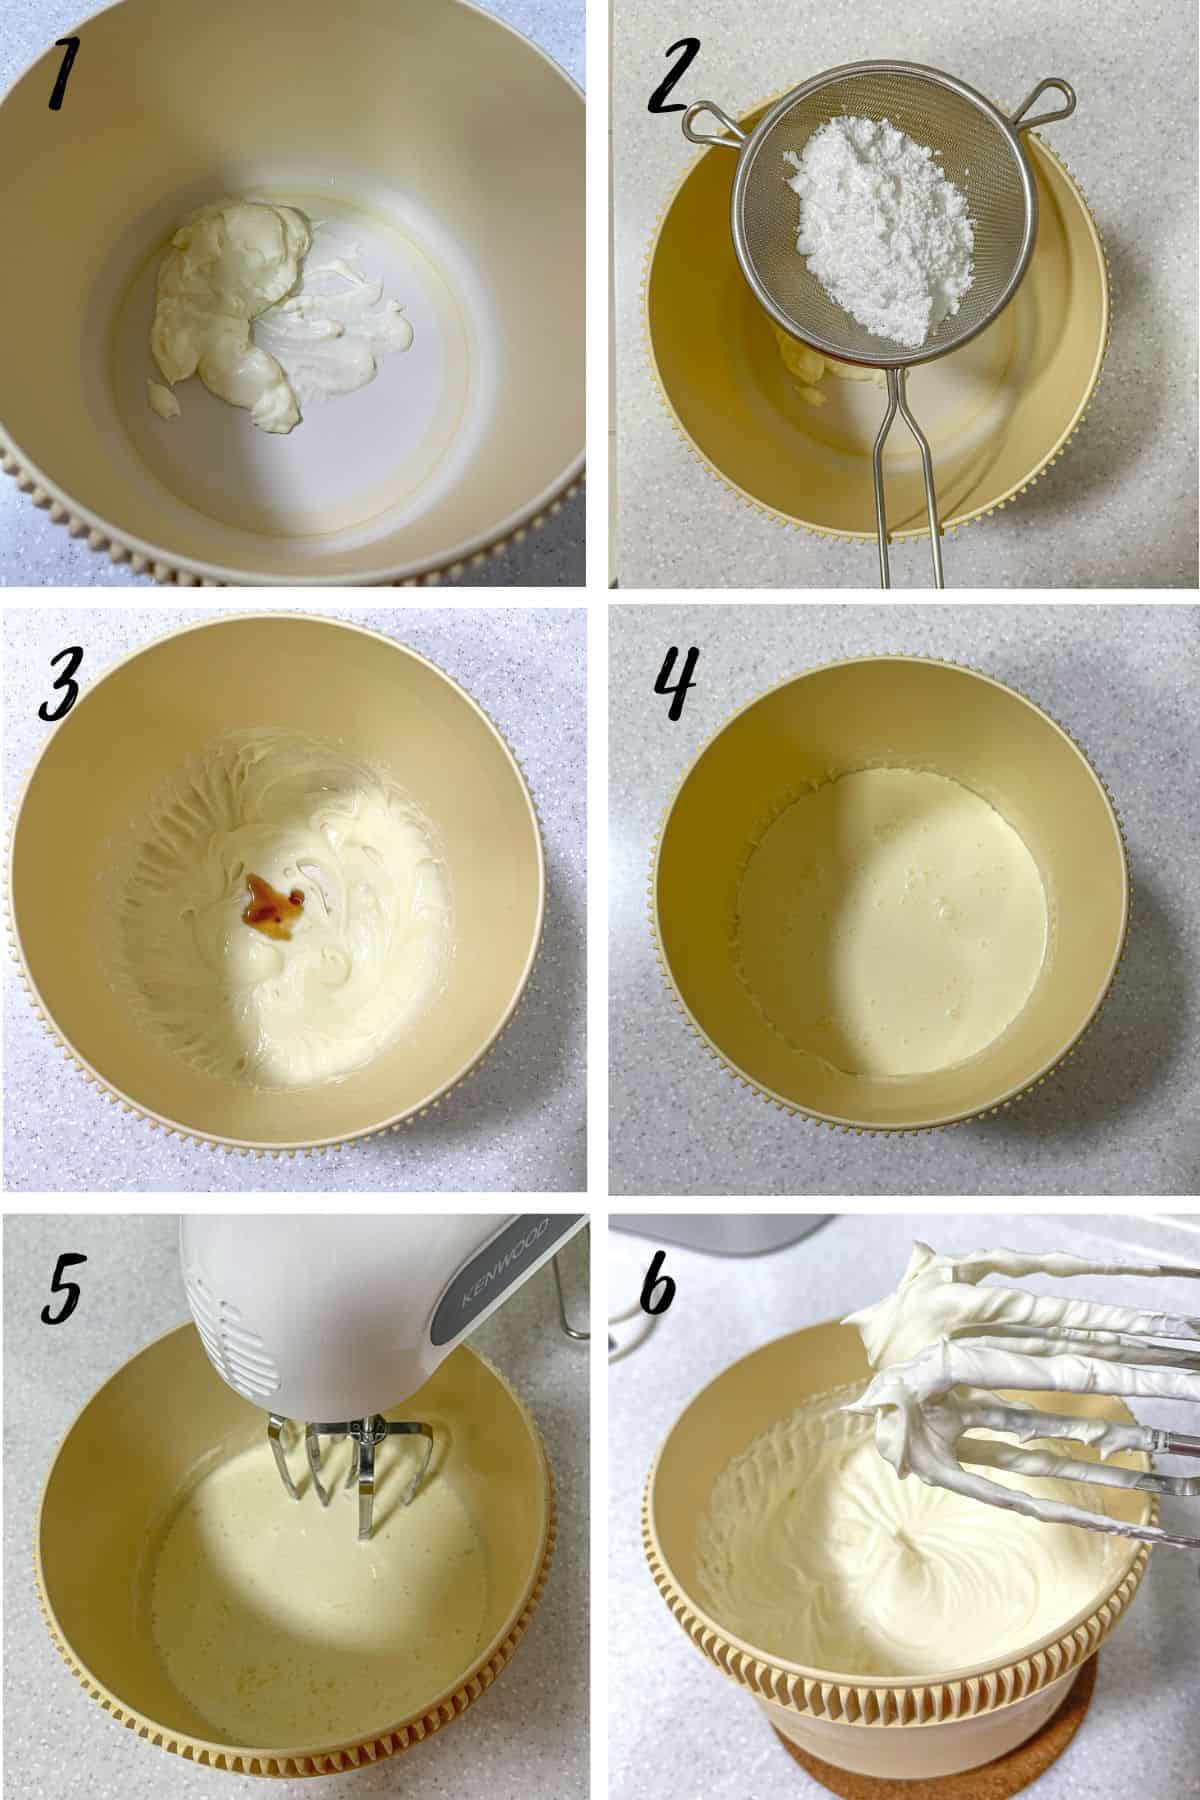 A poster of 6 images showing how to whip mascarpone cheese and whipped cream to make frosting.